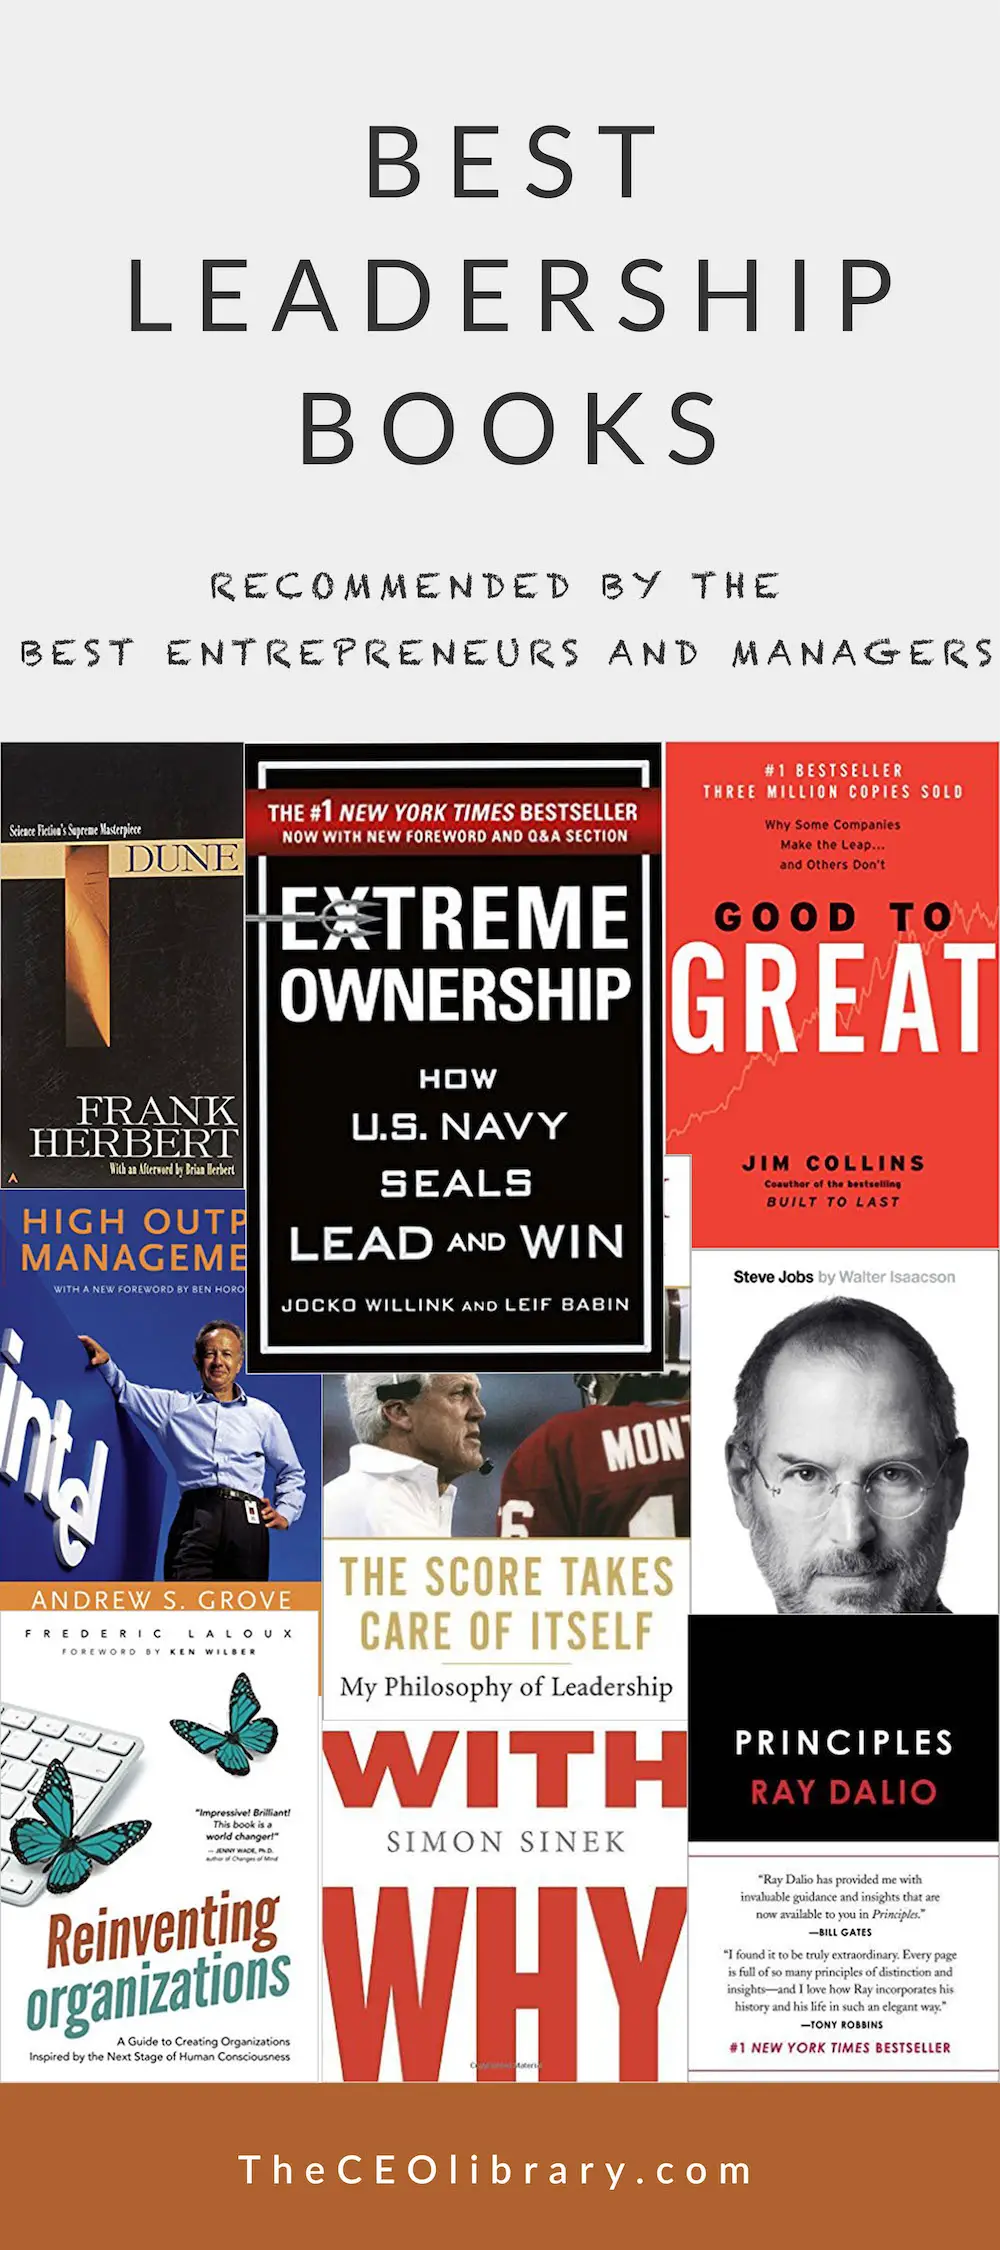 Best Leadership Books - recommended by the best entrepreneurs and managers